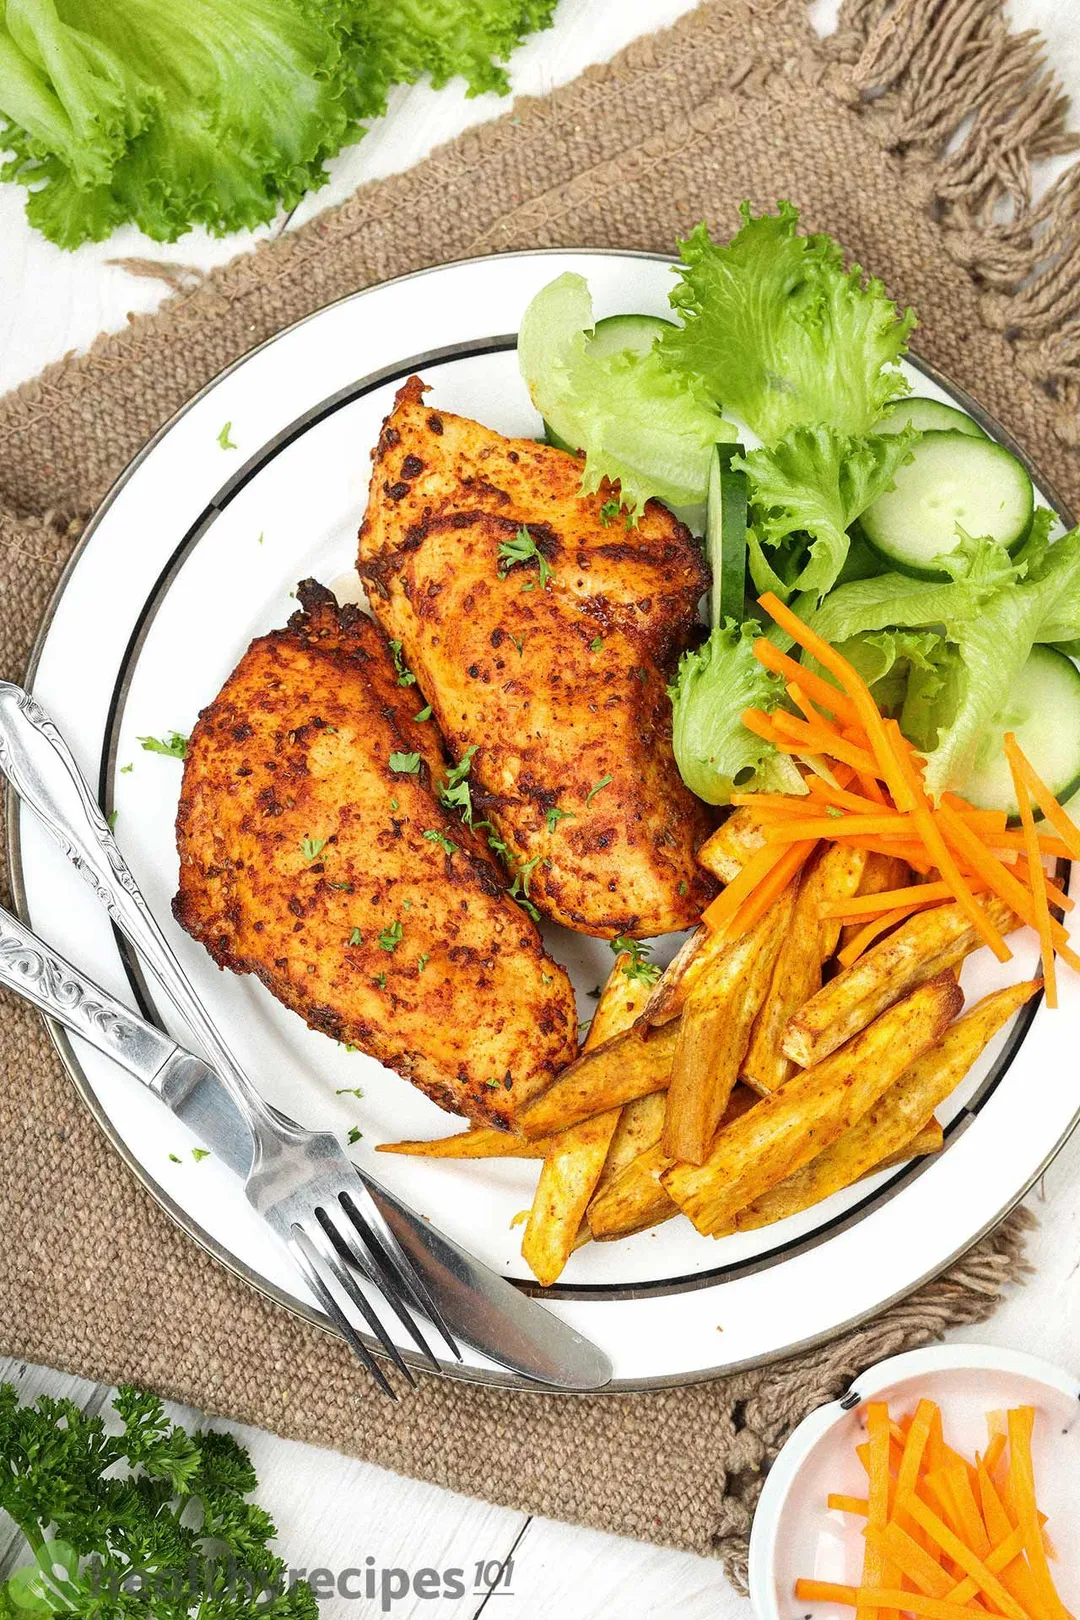 A plate of cooked chicken breasts covered in spices, fried sweet potatoes, lettuce, and cucumber slices